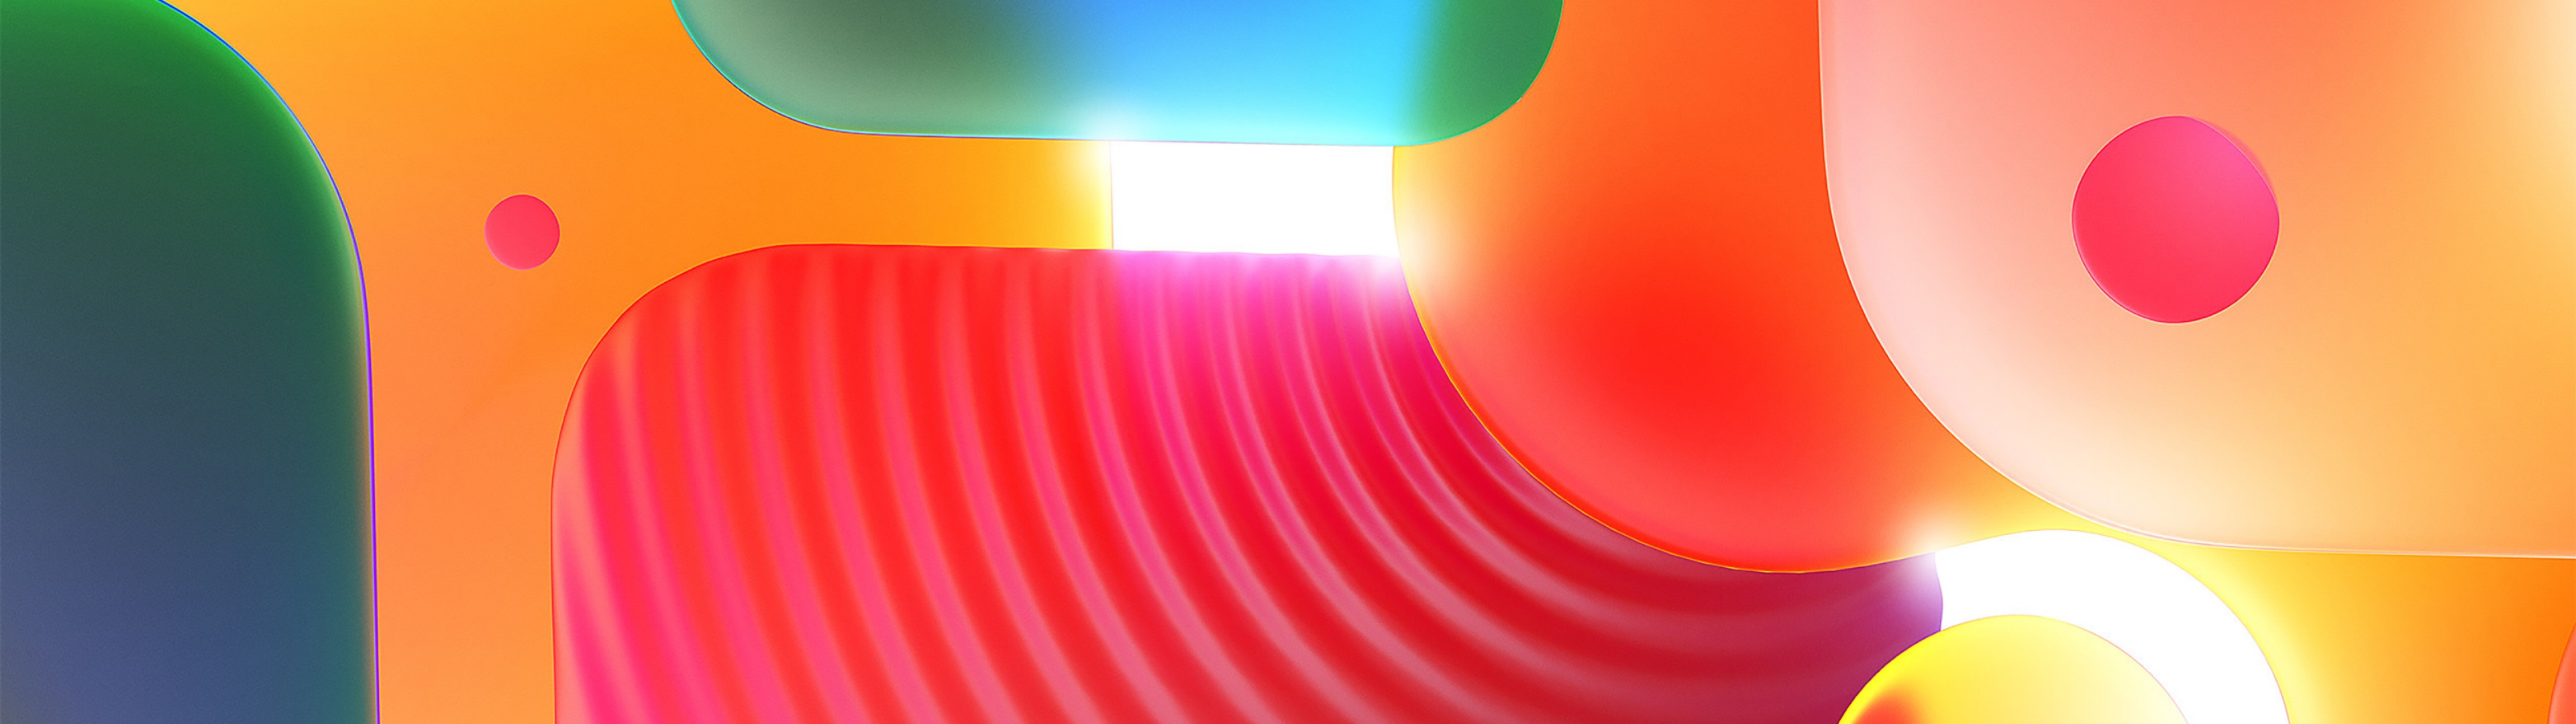 A colorful abstract image with a variety of shapes and vibrant colors. - 3D, light red